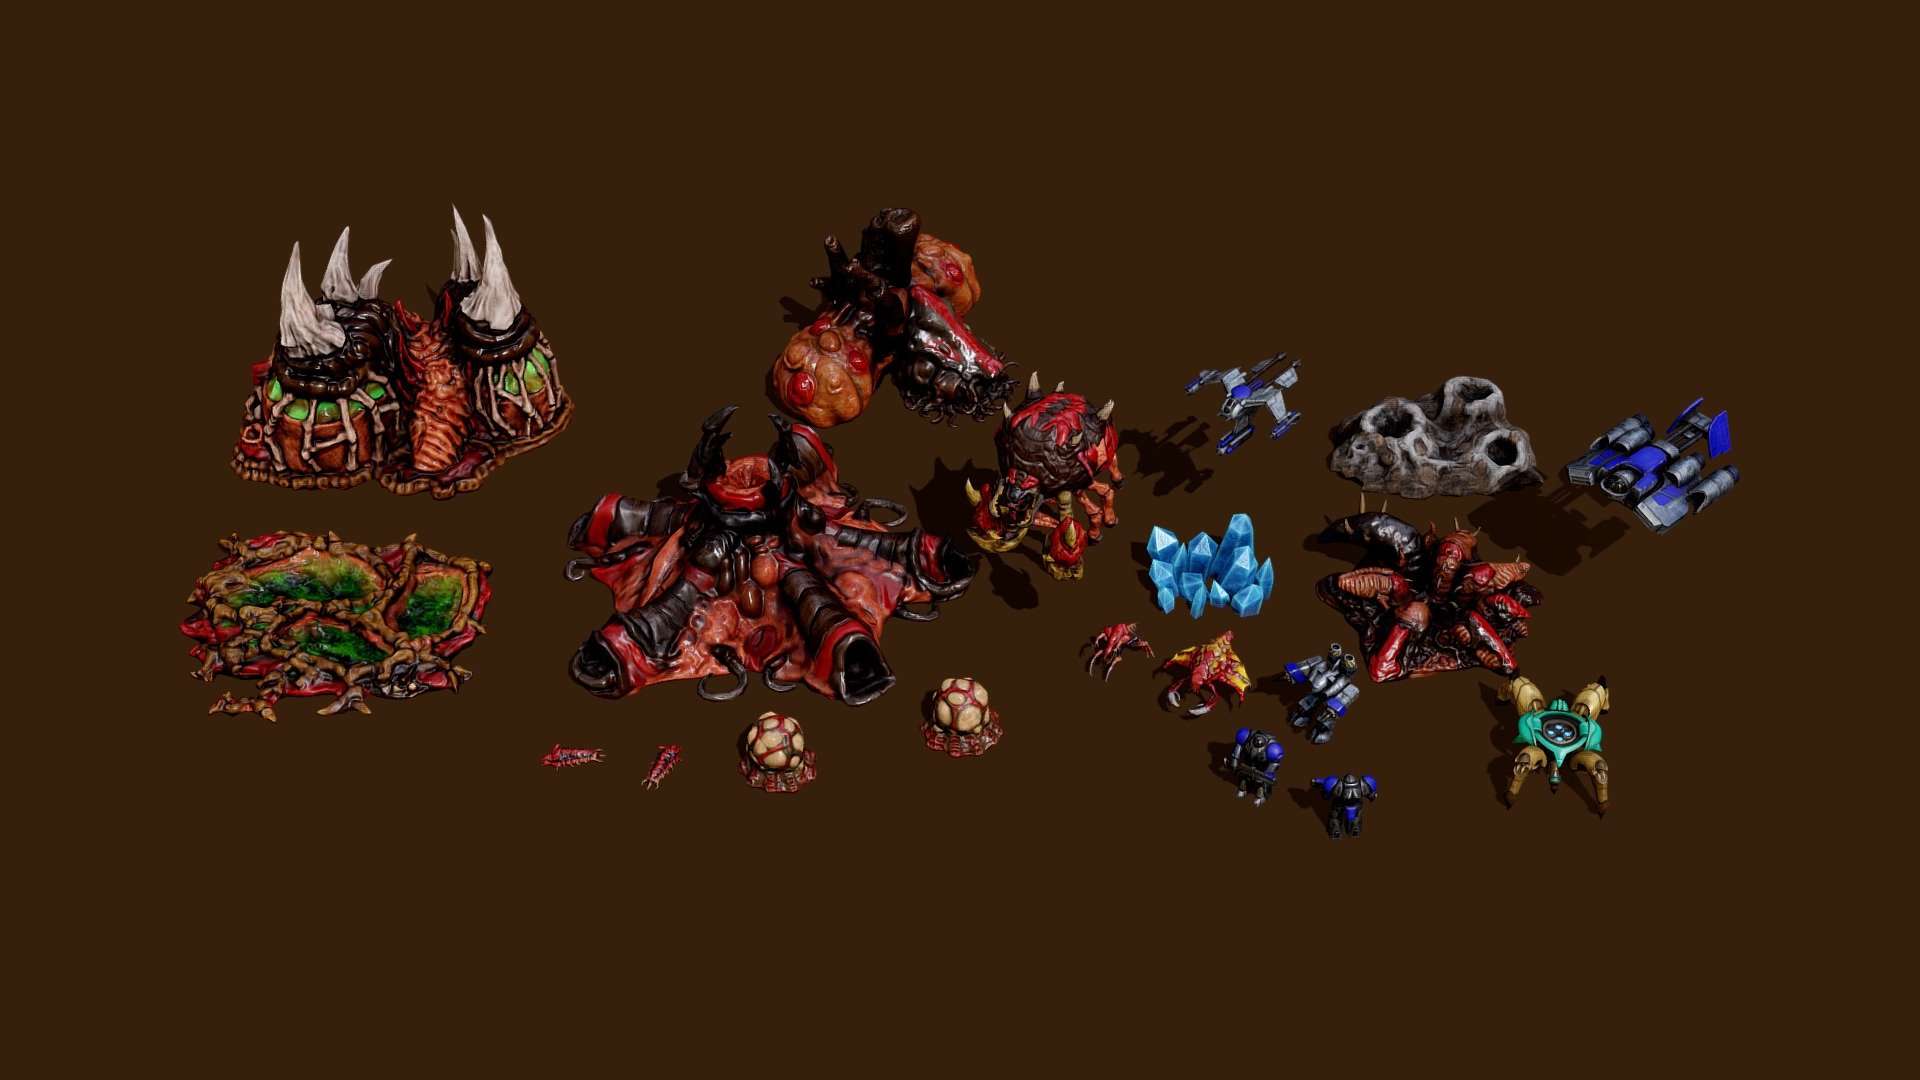 starcraft remastered zoom in and out